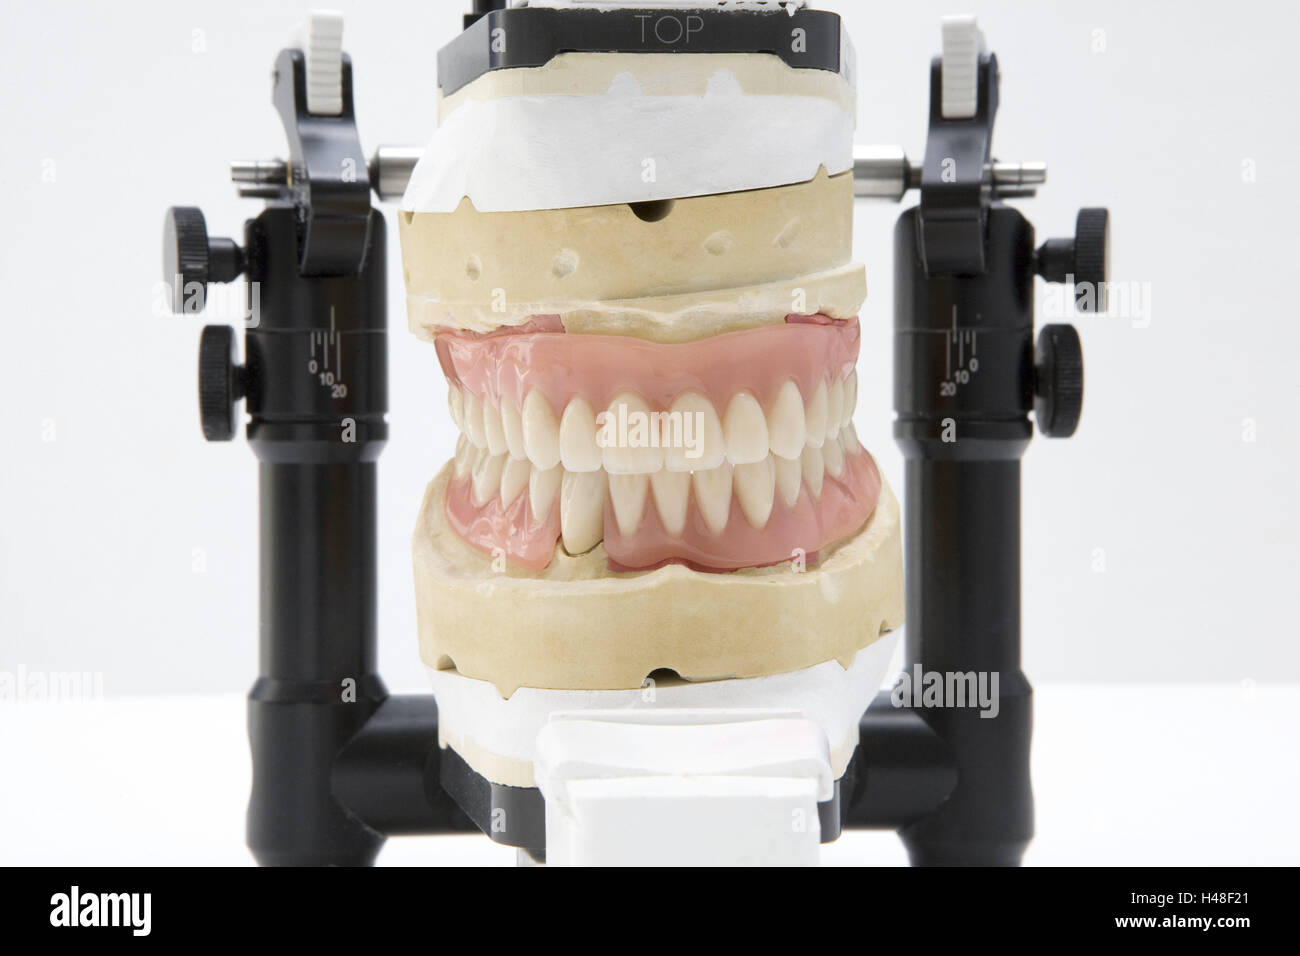 Articulator, set dentures, upper jaw, lower jaw, cog laboratory, gypsum models, bite, cog technology, denture, prosthesis, cogs, dentistry, health, health policy, product photography, Stock Photo